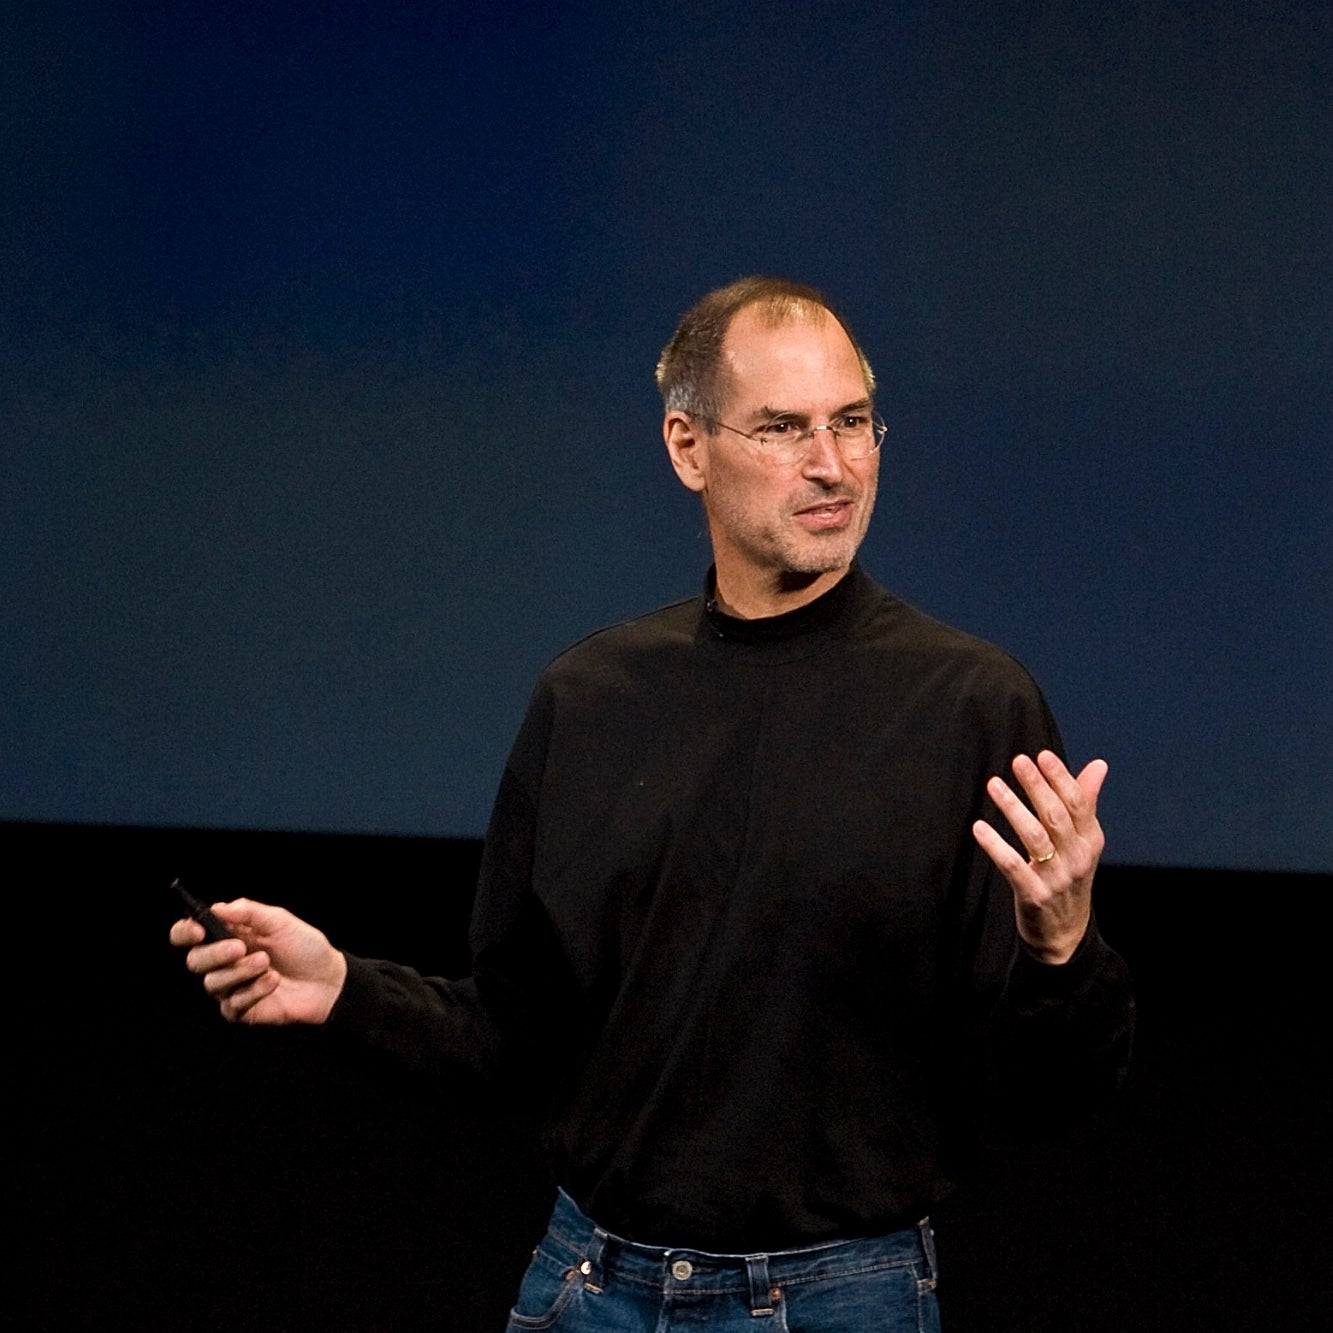 Steve Jobs - The Life, Legacy, And Innovative Vision Of A Technology Icon